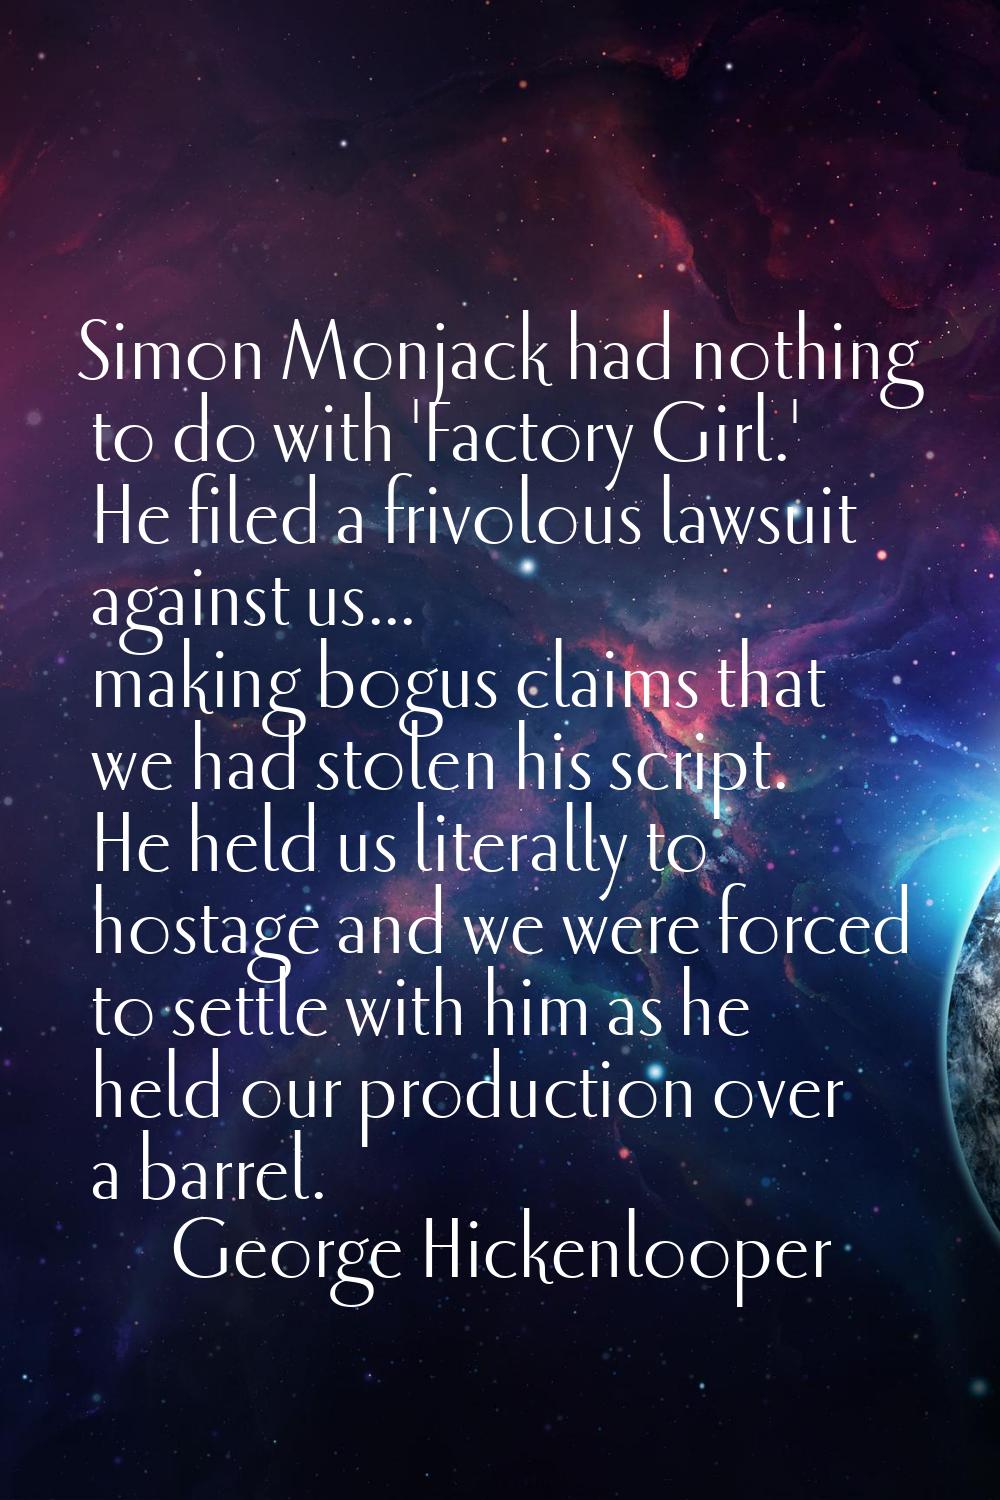 Simon Monjack had nothing to do with 'Factory Girl.' He filed a frivolous lawsuit against us... mak